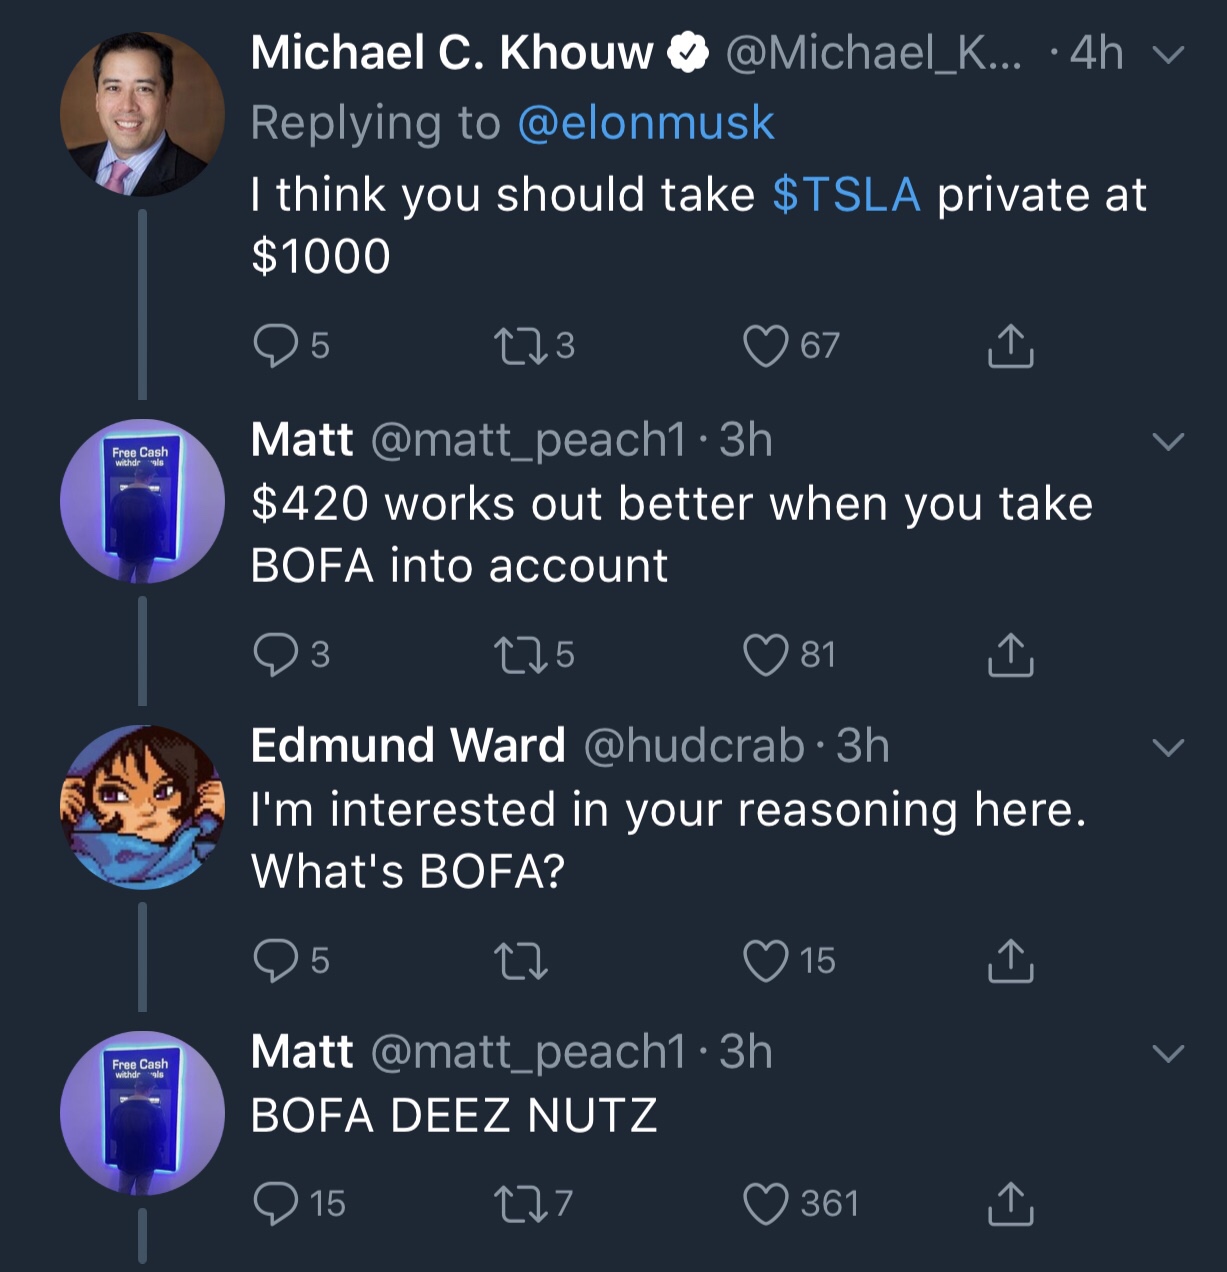 dank meme screenshot - Free Cash withdrs Michael C. Khouw ... 4h v I think you should take $Tsla private at $1000 25 223 067 I Matt 3h $420 works out better when you take Bofa into account 23 225 81 Edmund Ward 3h I'm interested in your reasoning here. Wh